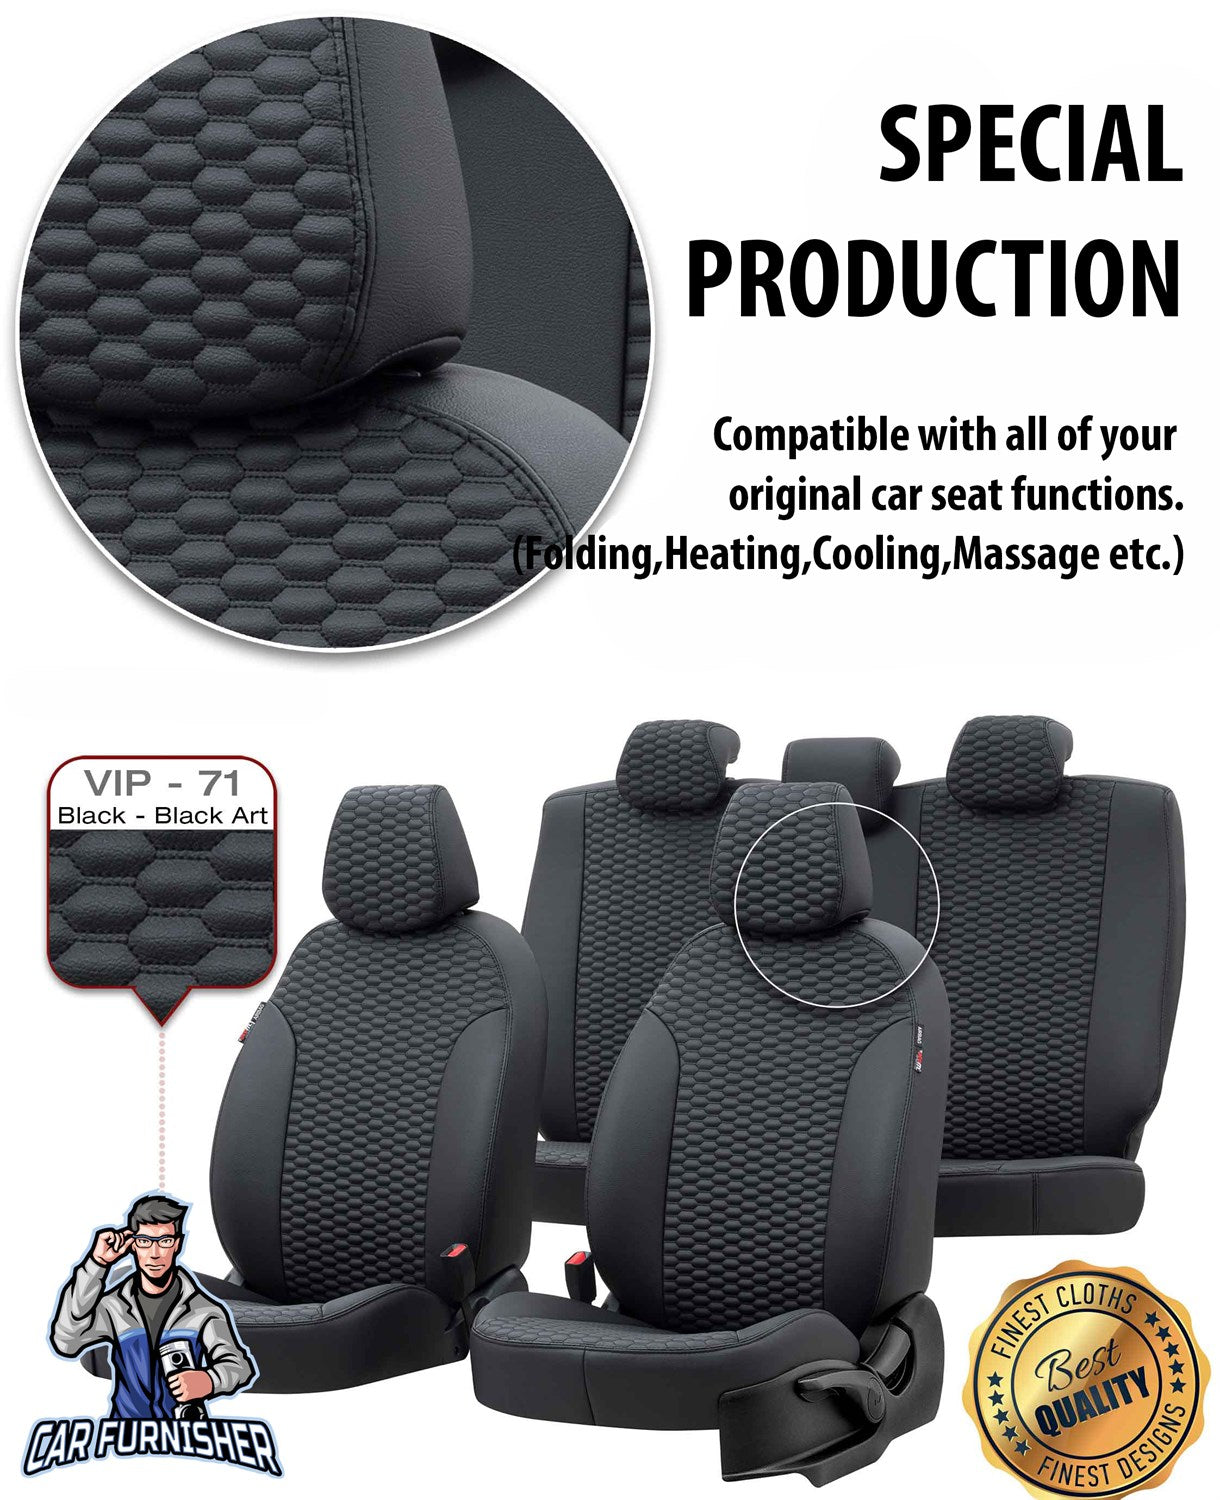 Scania G Seat Cover Tokyo Leather Design Black Front Seats (2 Seats + Handrest + Headrests) Leather